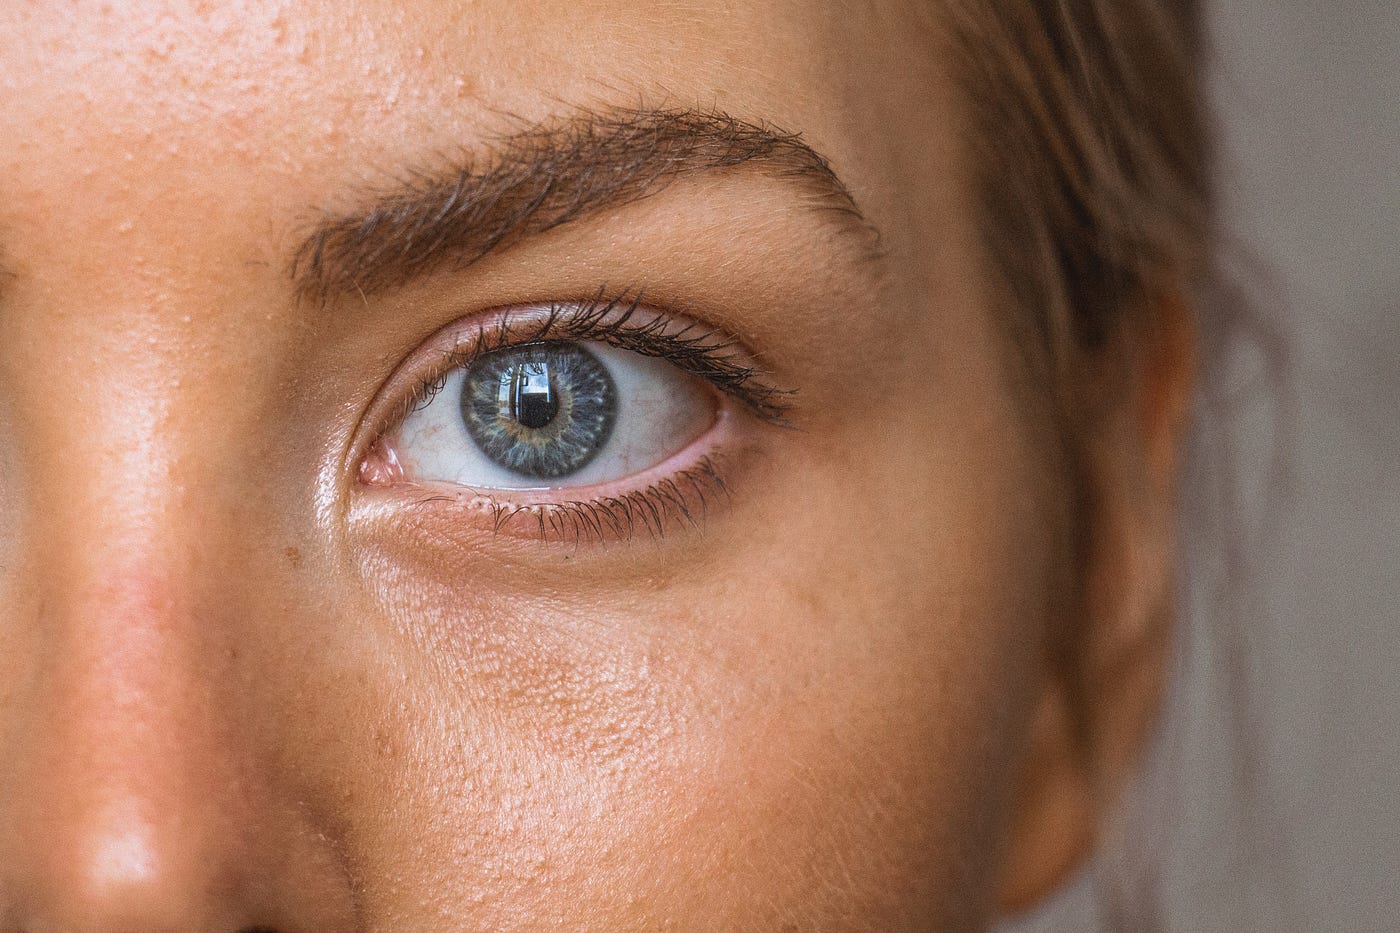 What Type of Eye Bags Do You Have?, by Julia Brown